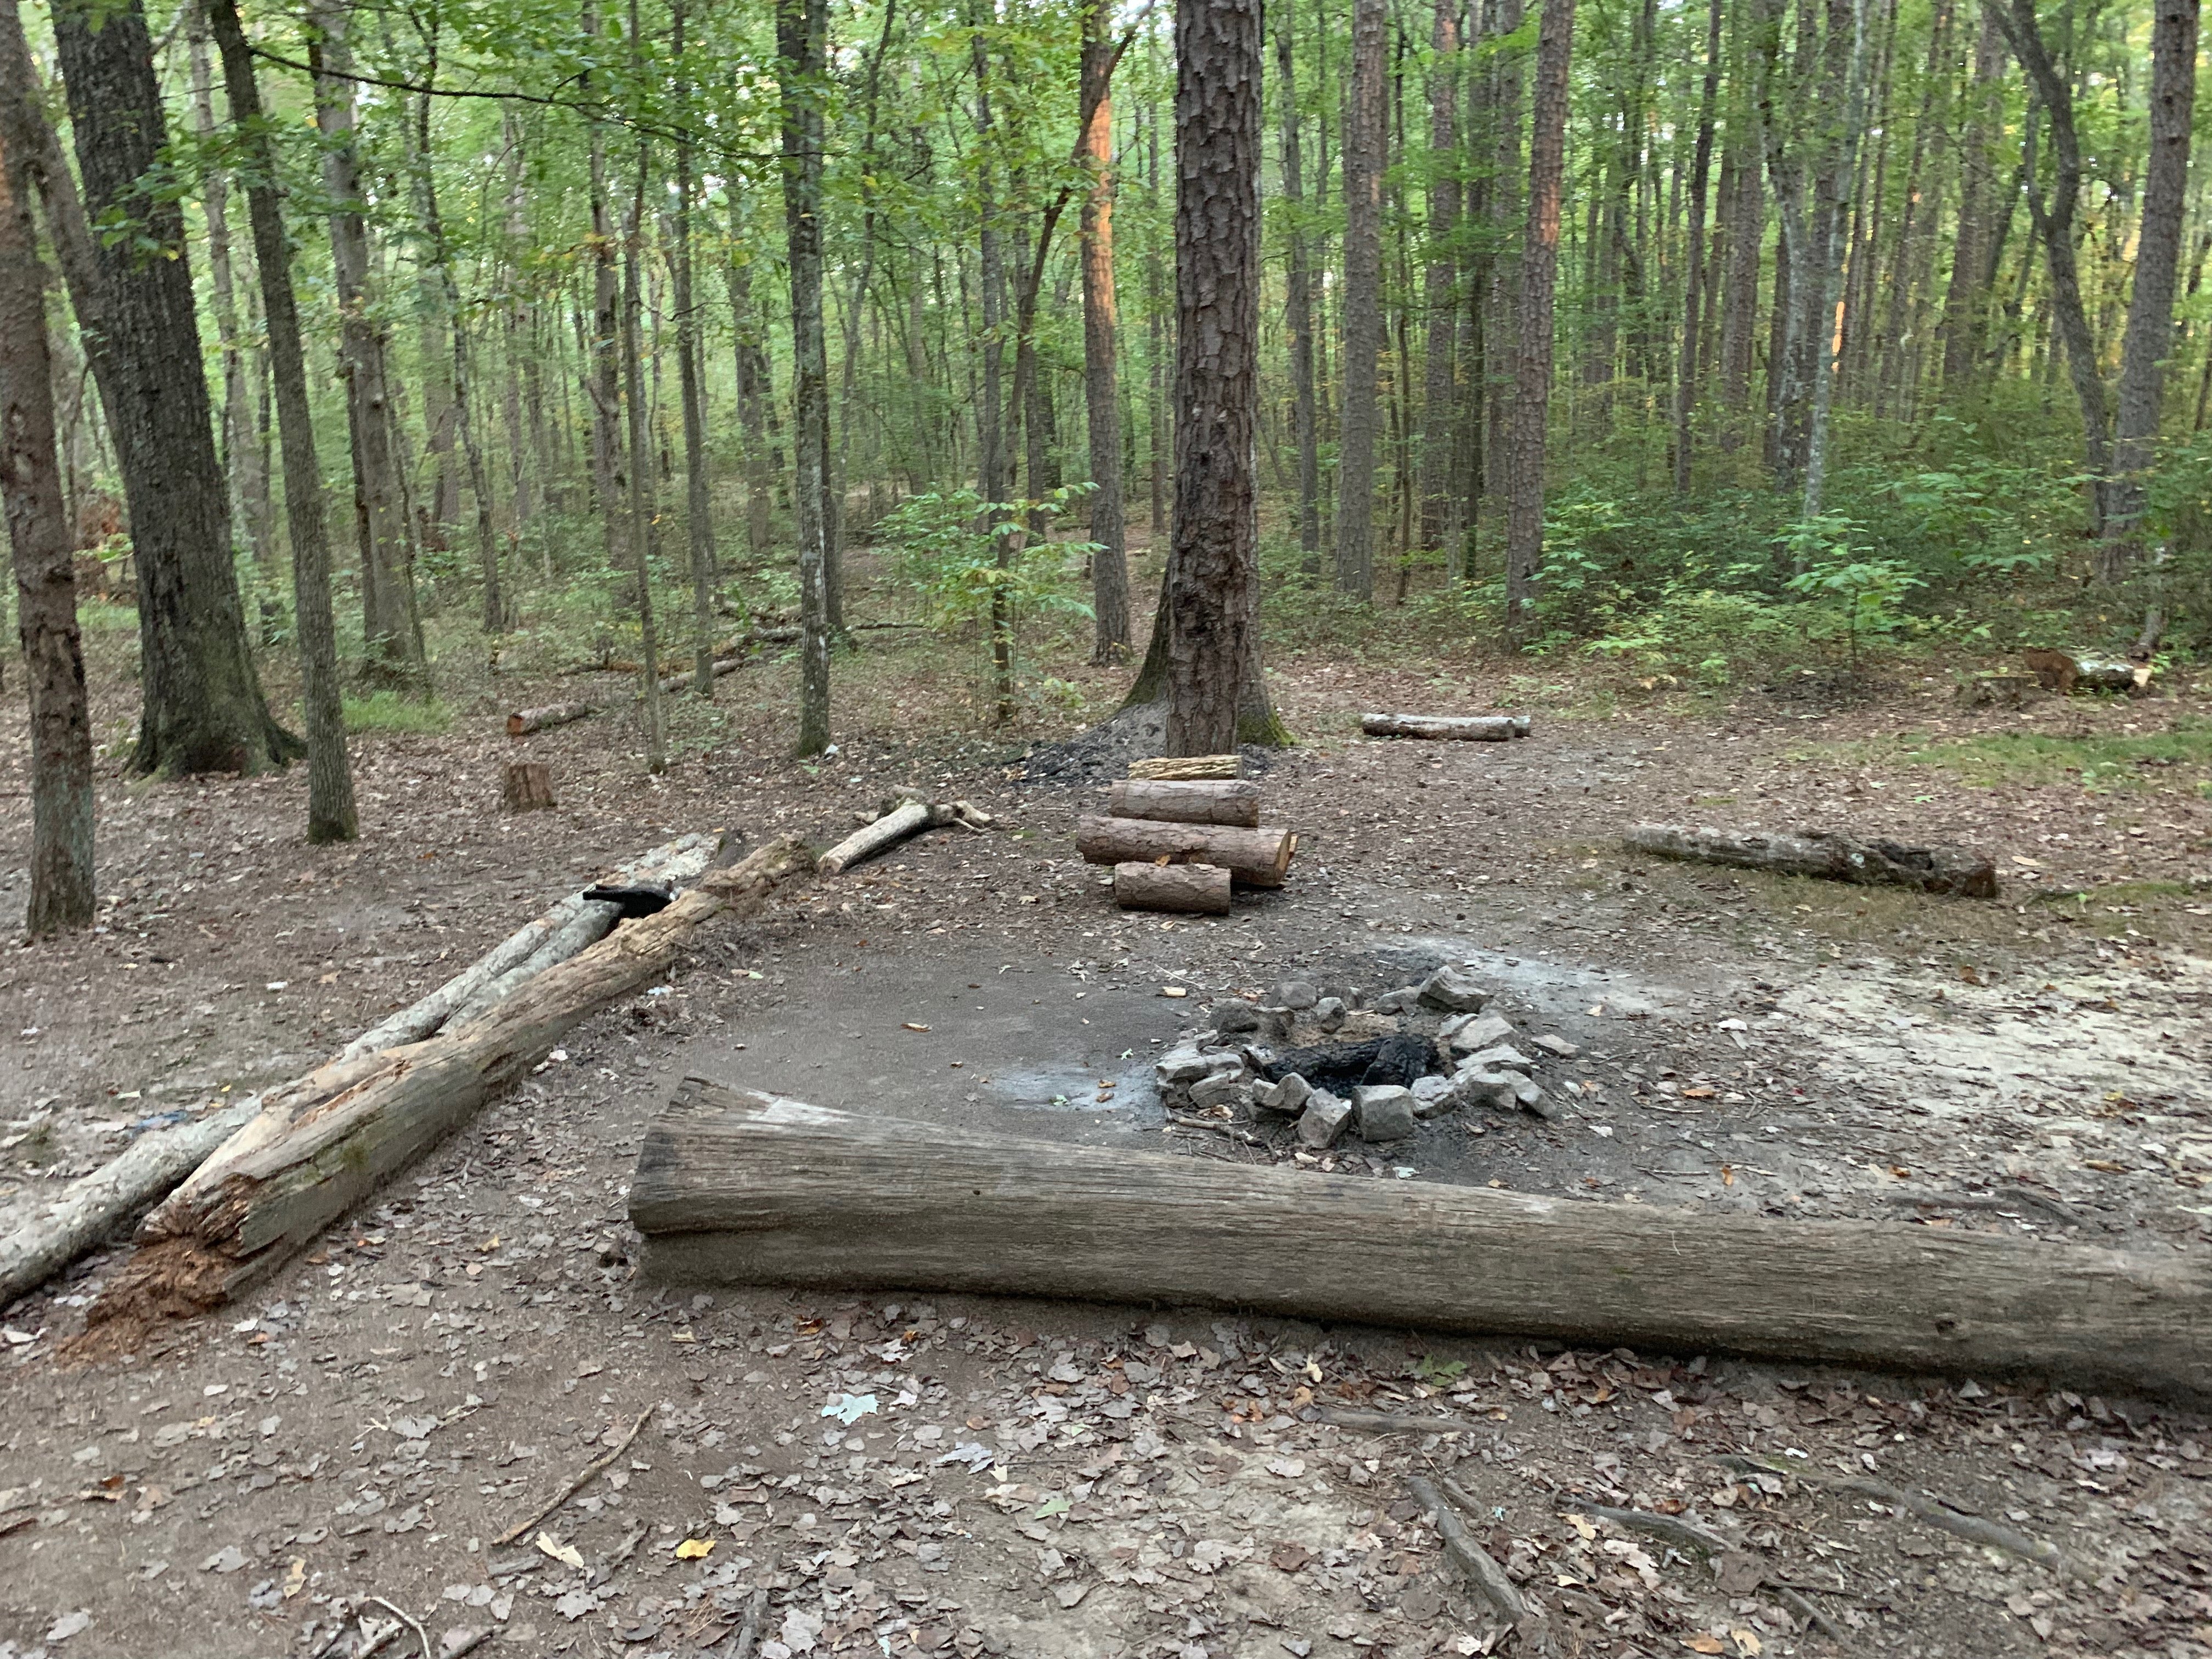 Fire Ring with logs to sit on.